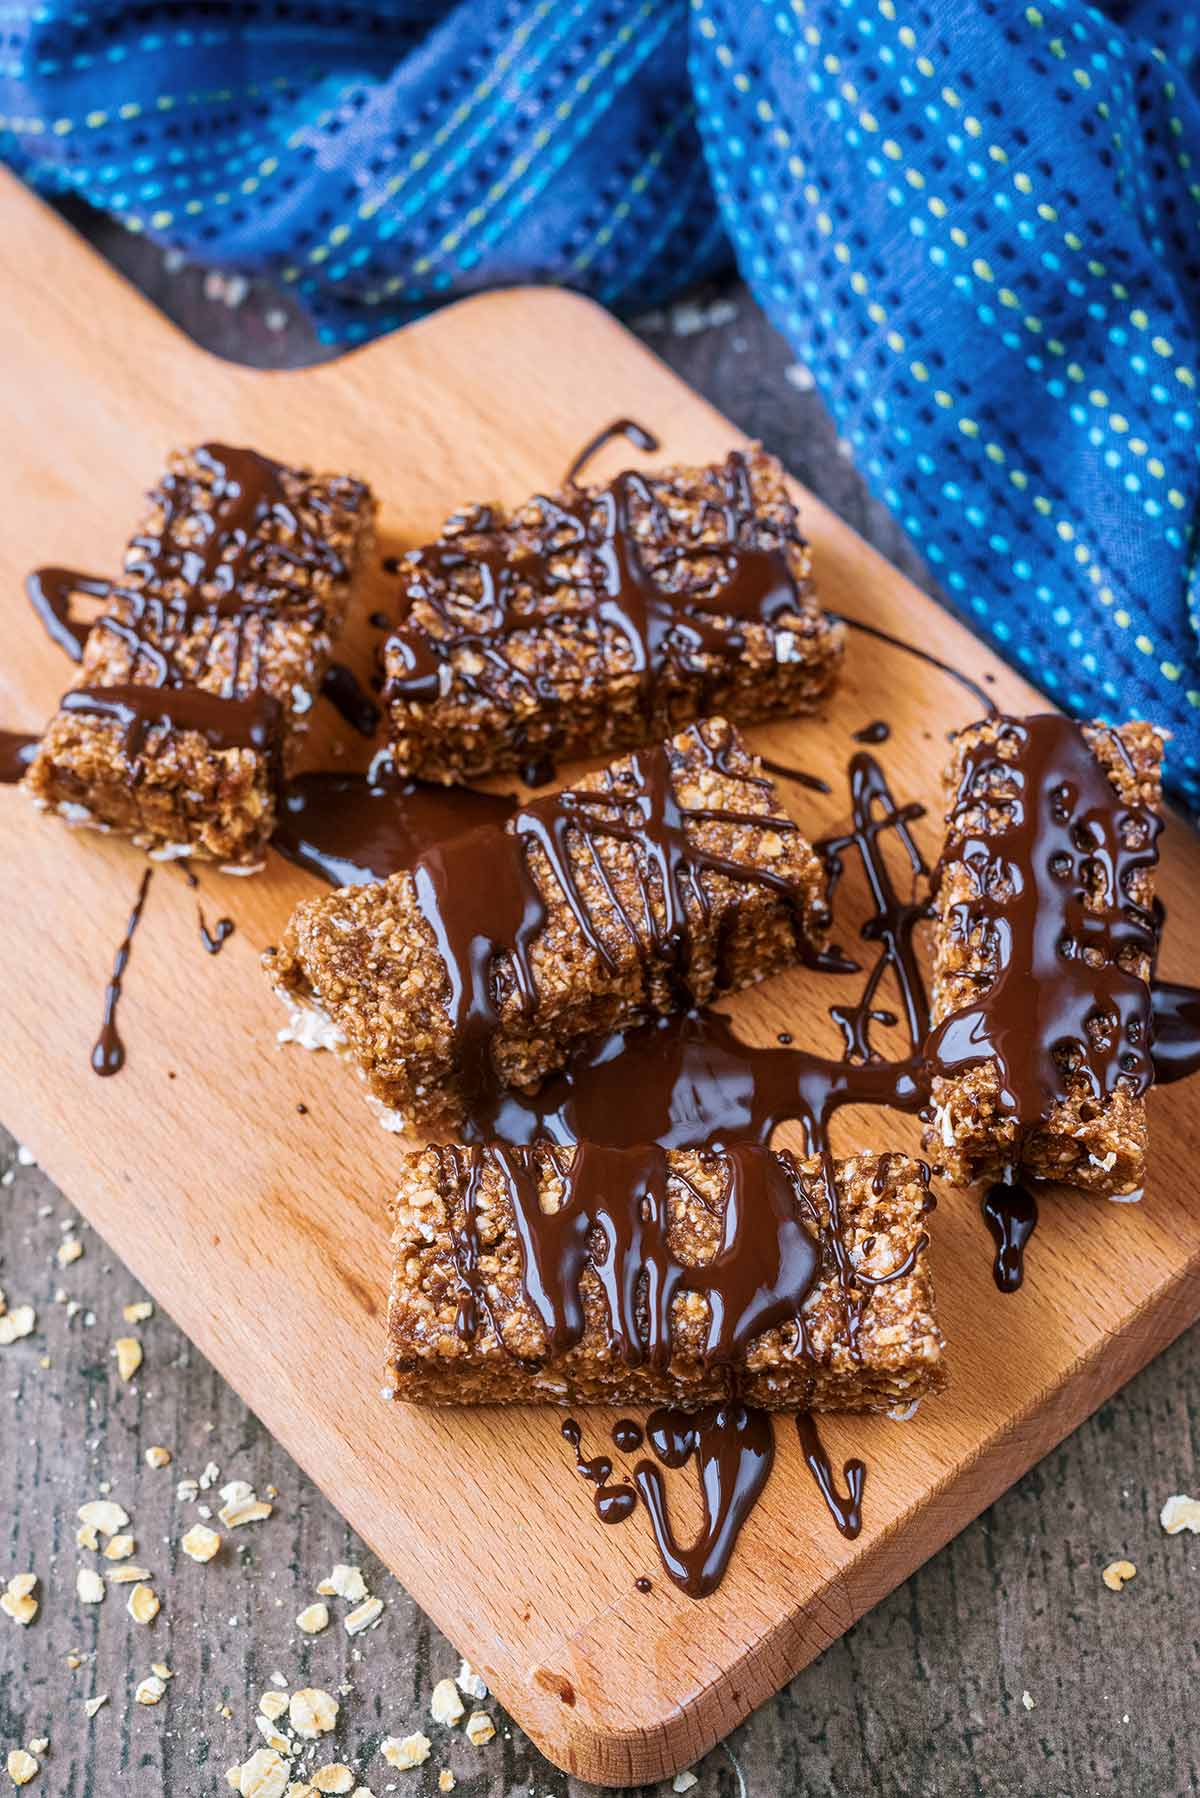 Five protein bars with melted chocolate drizzled over them.